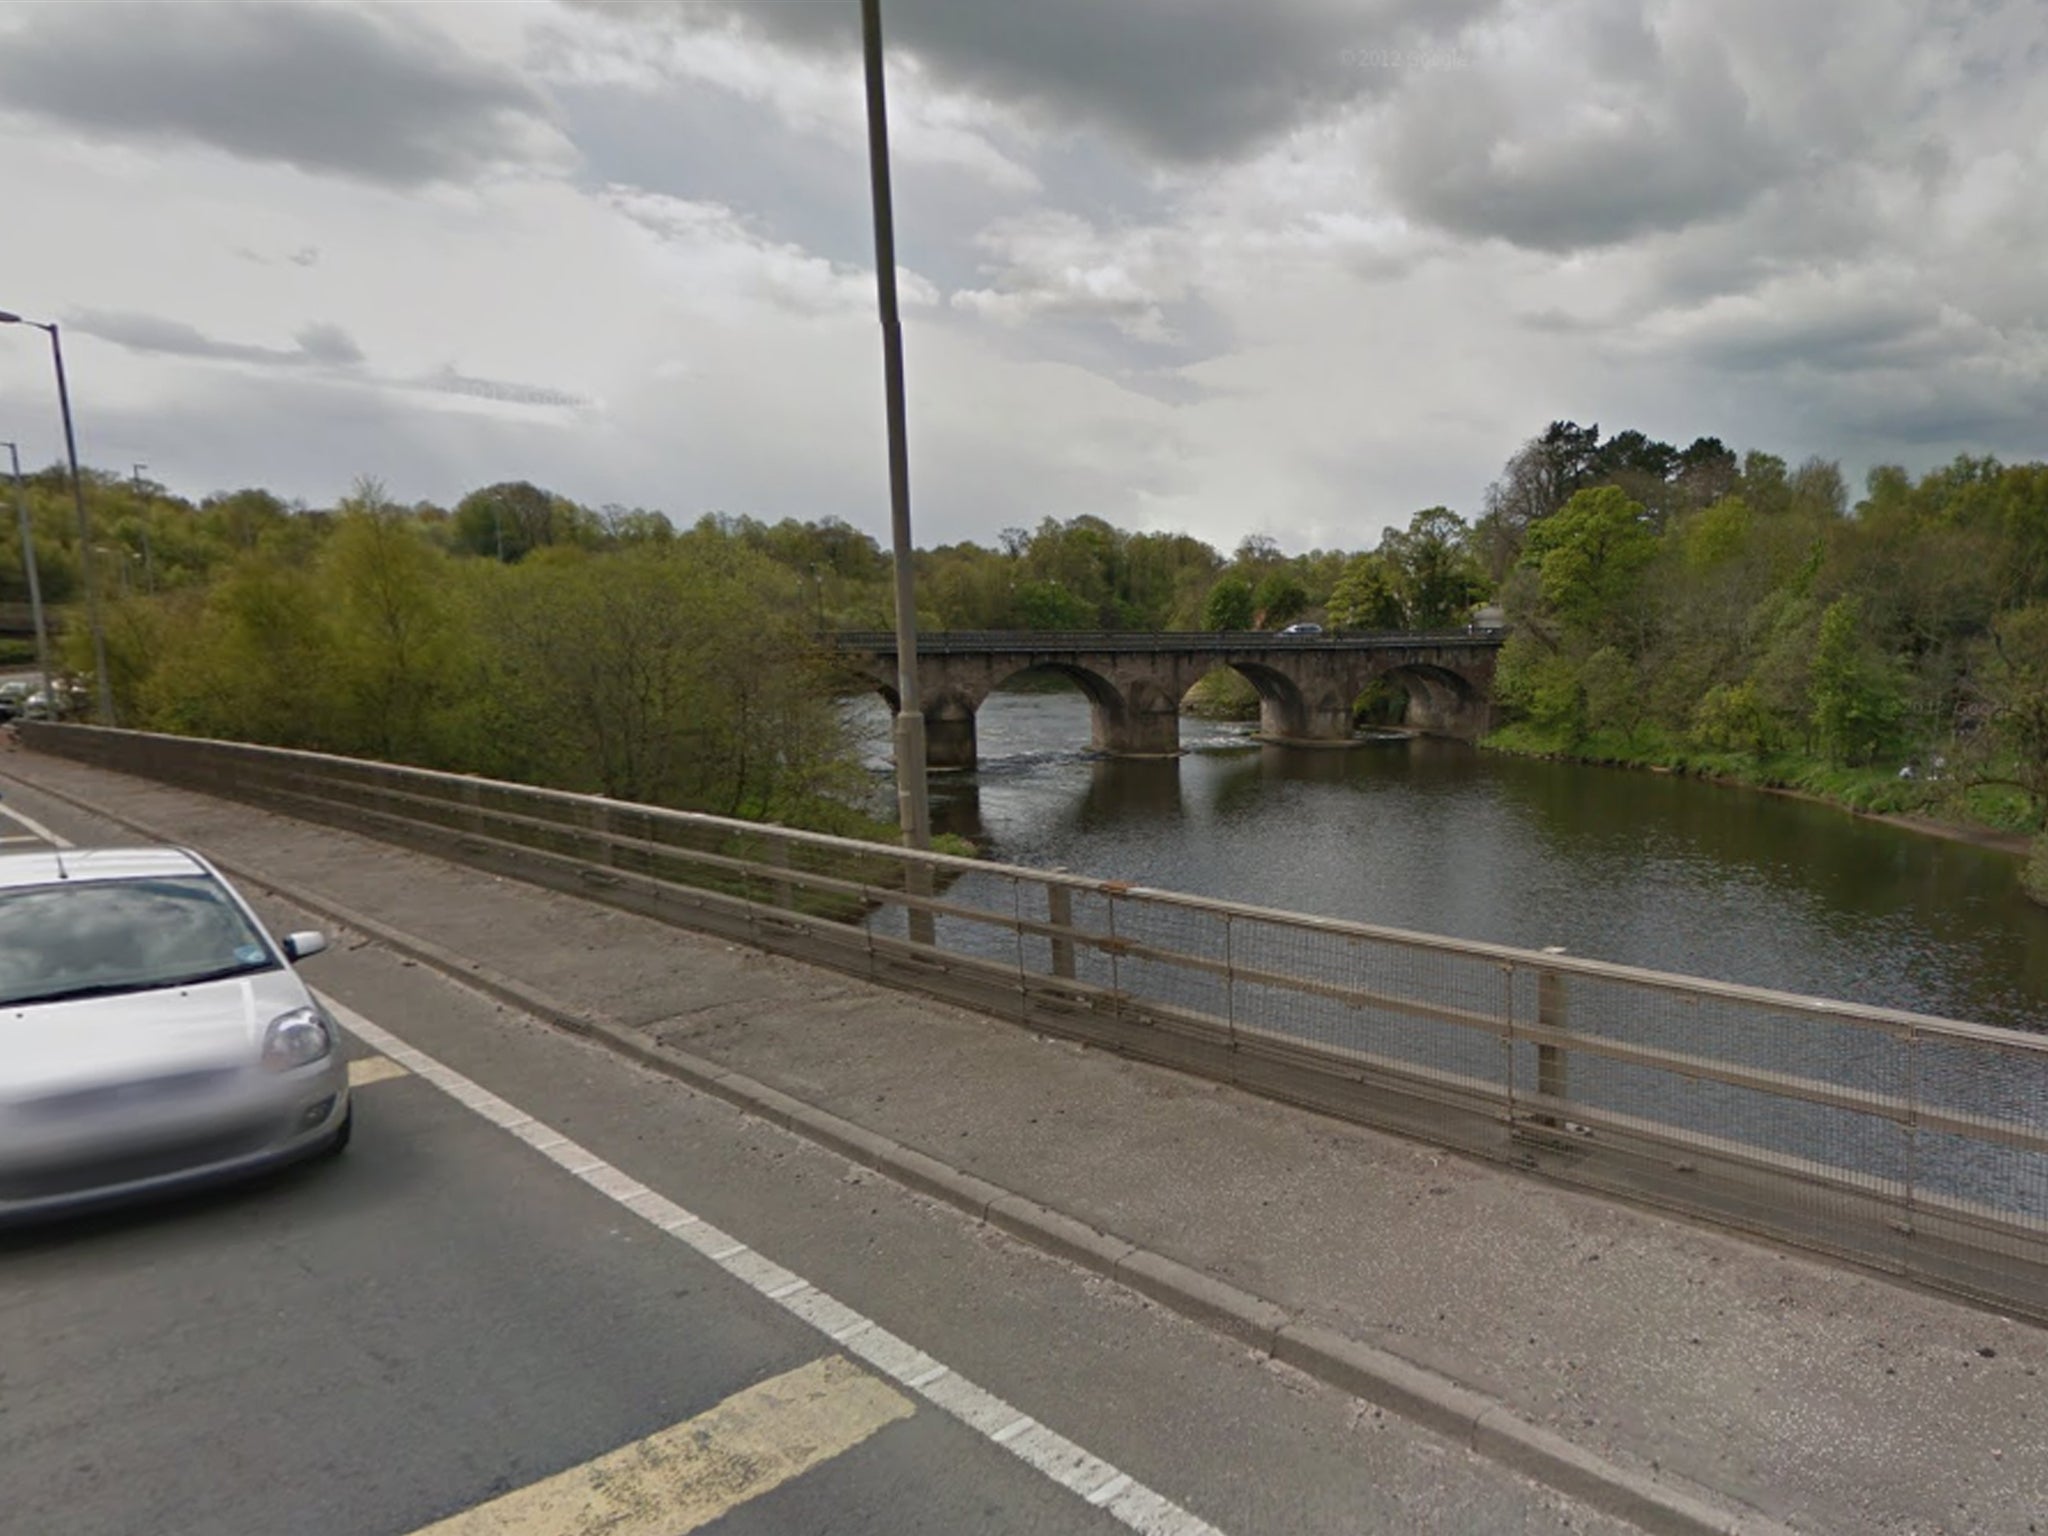 Google maps image taken from the road where the crash happened. A man and his 9-year-old son died after their car plunged off the bridge into the river